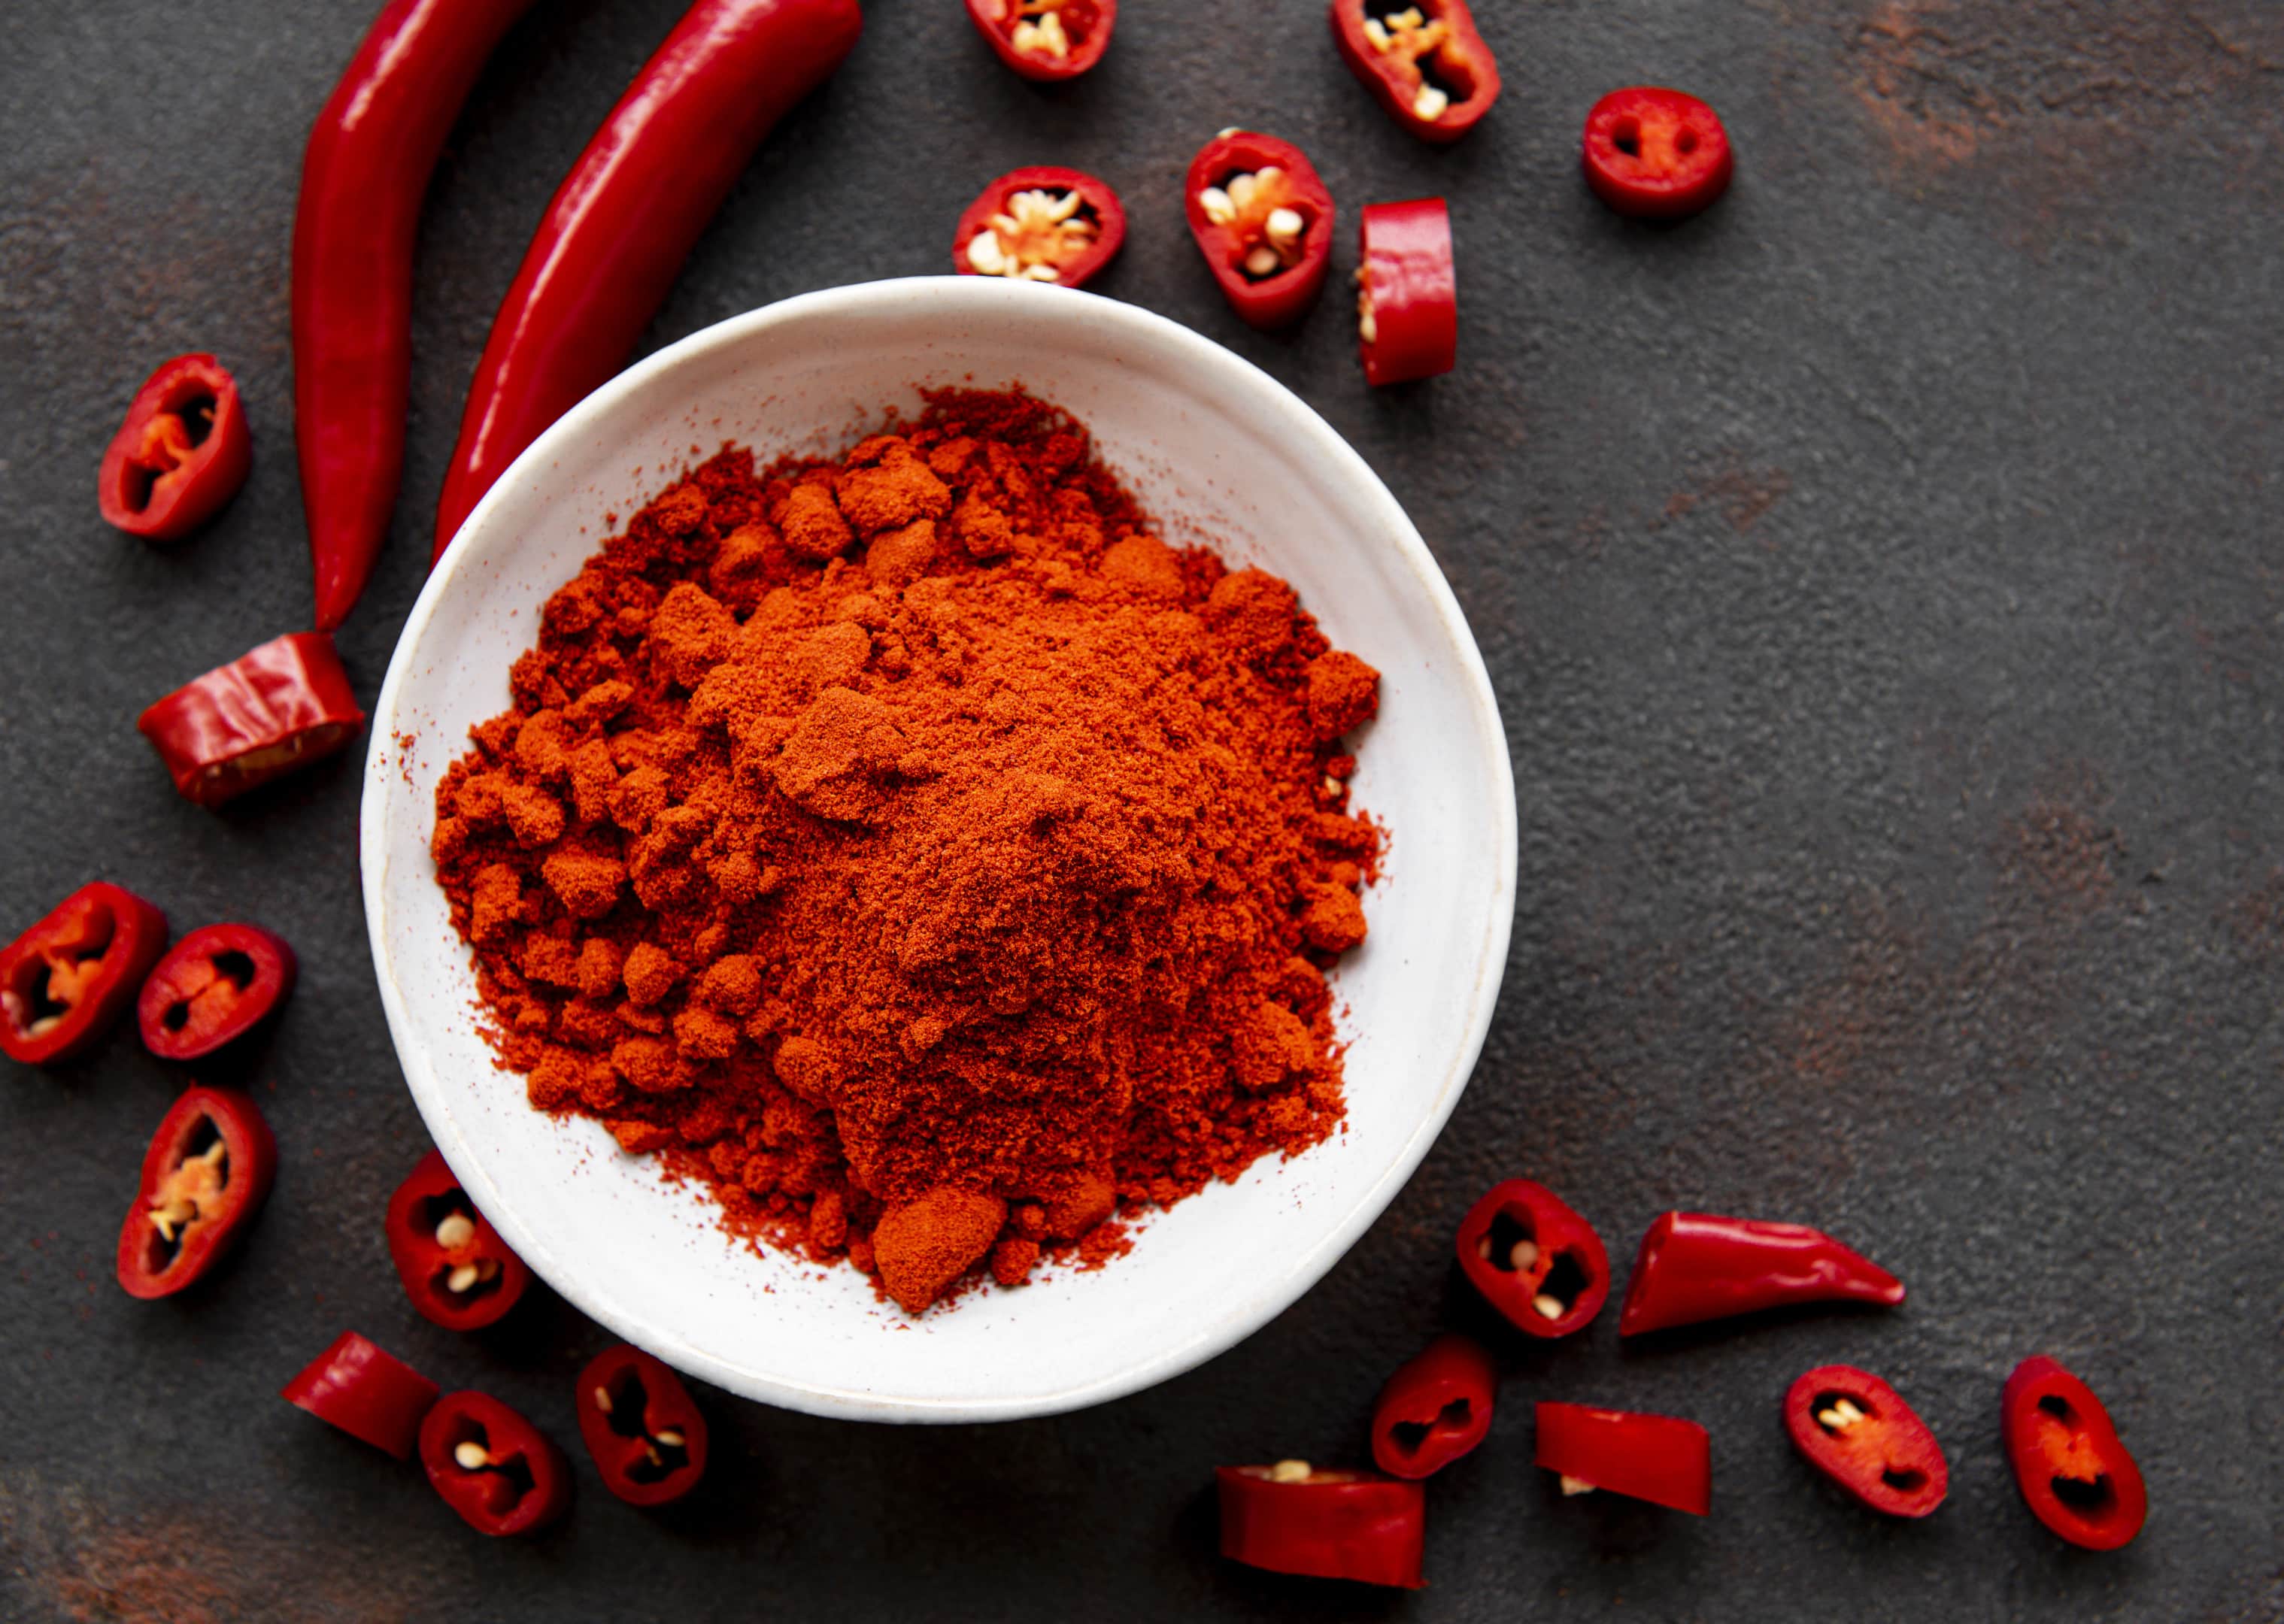 Red chili pepper powder and dried chilies on dark surface